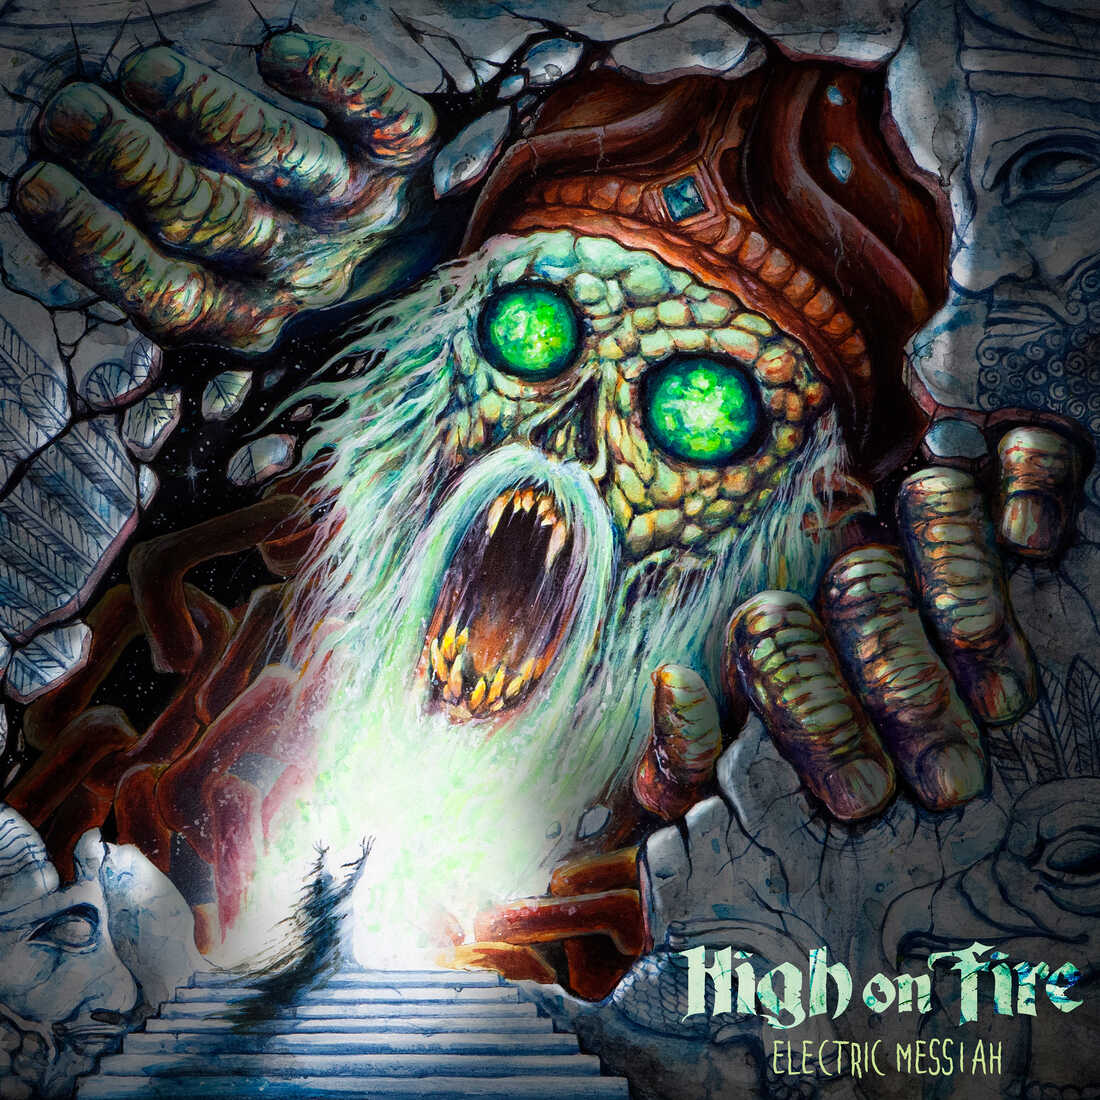 High On Fire's 'Electric Messiah' Pays Homage To Motörhead's Lemmy, All Songs Considered